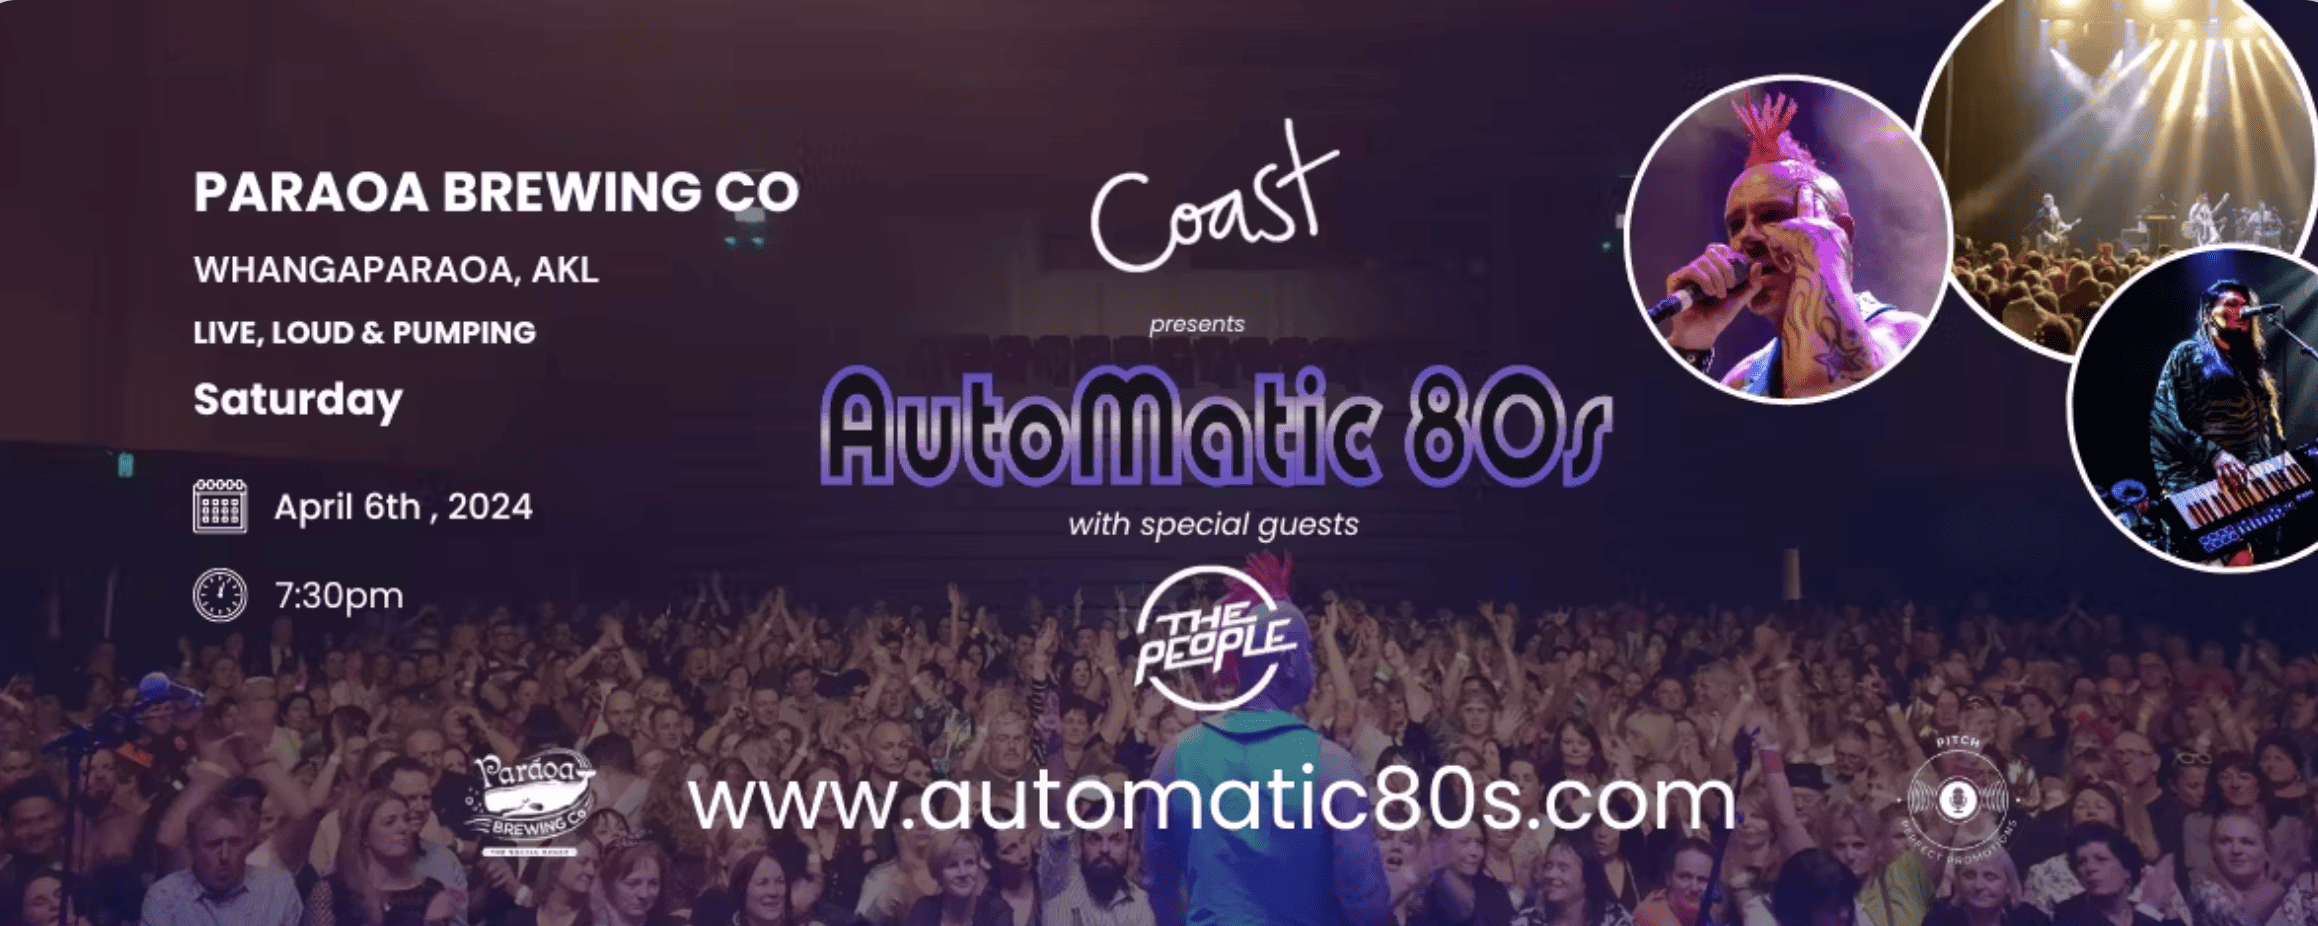 Concert flyer for Automatic 80s event, crowd excitement.